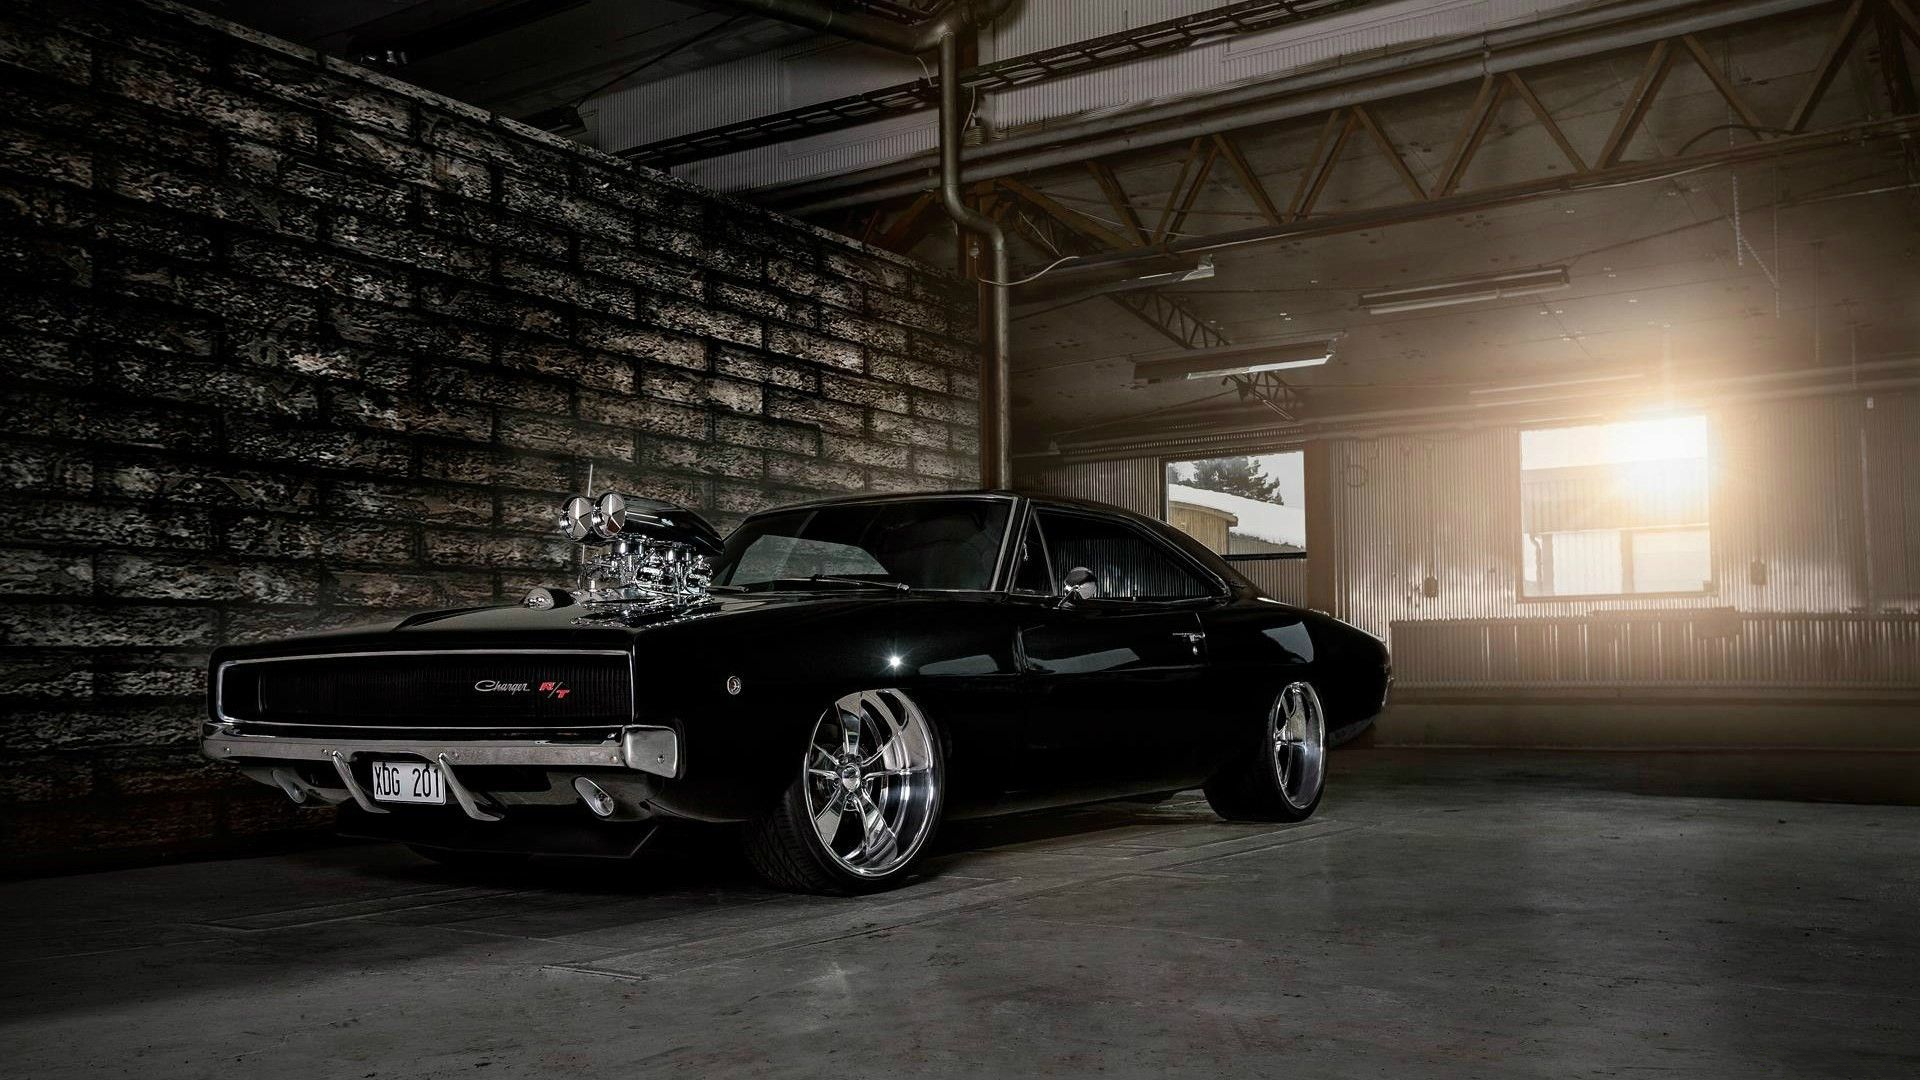 1970 dodge charger hd wallpaper cool images amazing hd apple